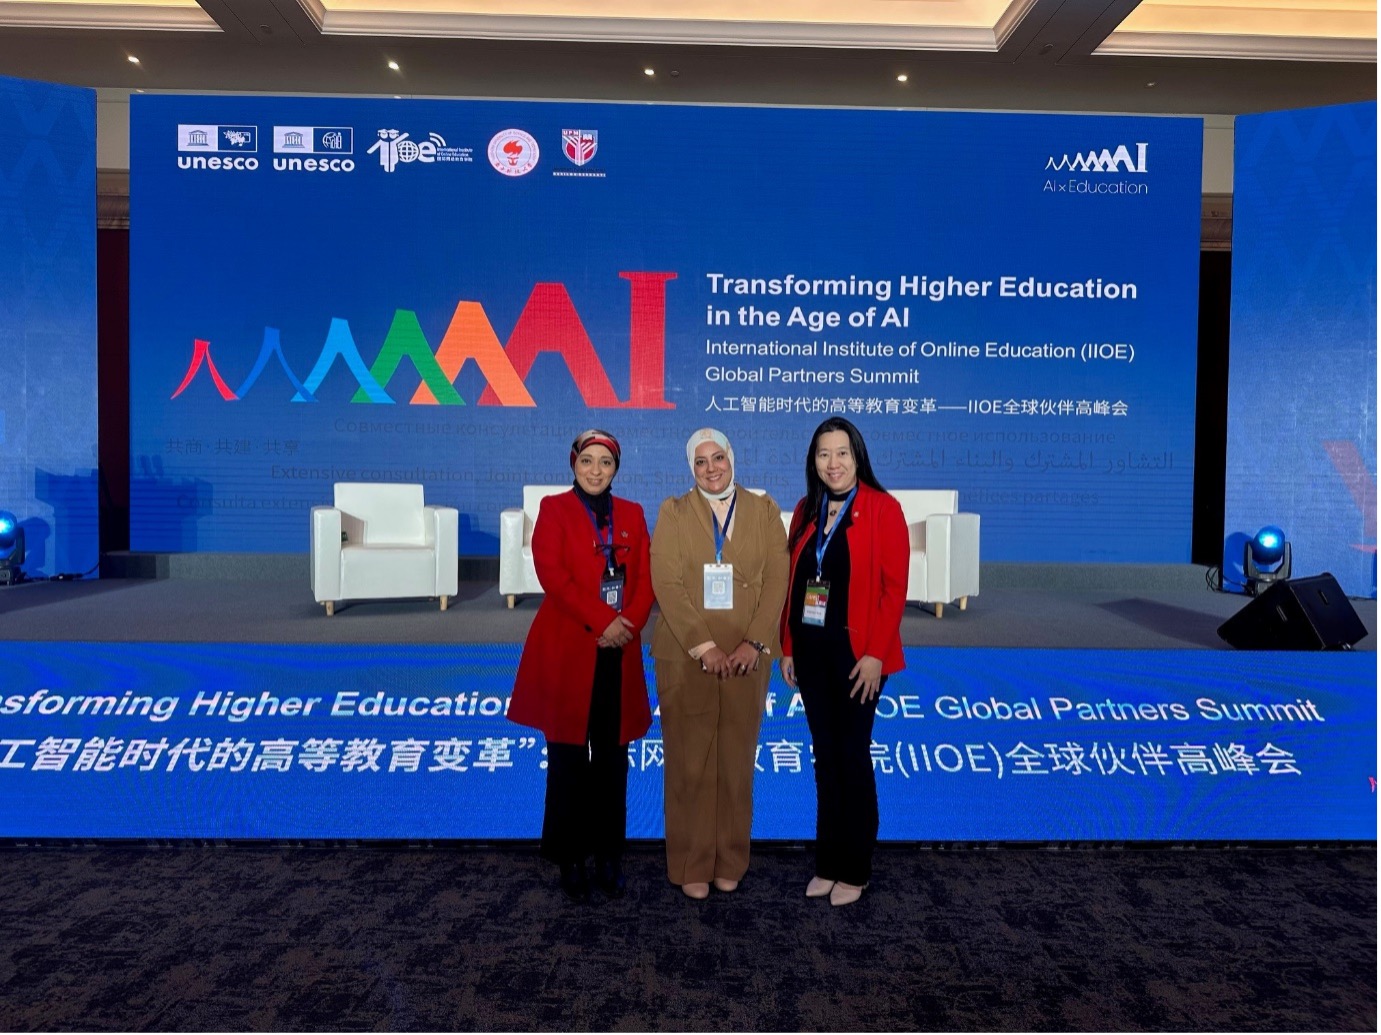 7th Dec 2023 – Prof. Cecilia Chan was invited as the Keynote Speaker to present at the International Institute of Online Education (IIOE) Global Partners Summit - Transforming Higher Education in the Age of AI organized by UNESCO